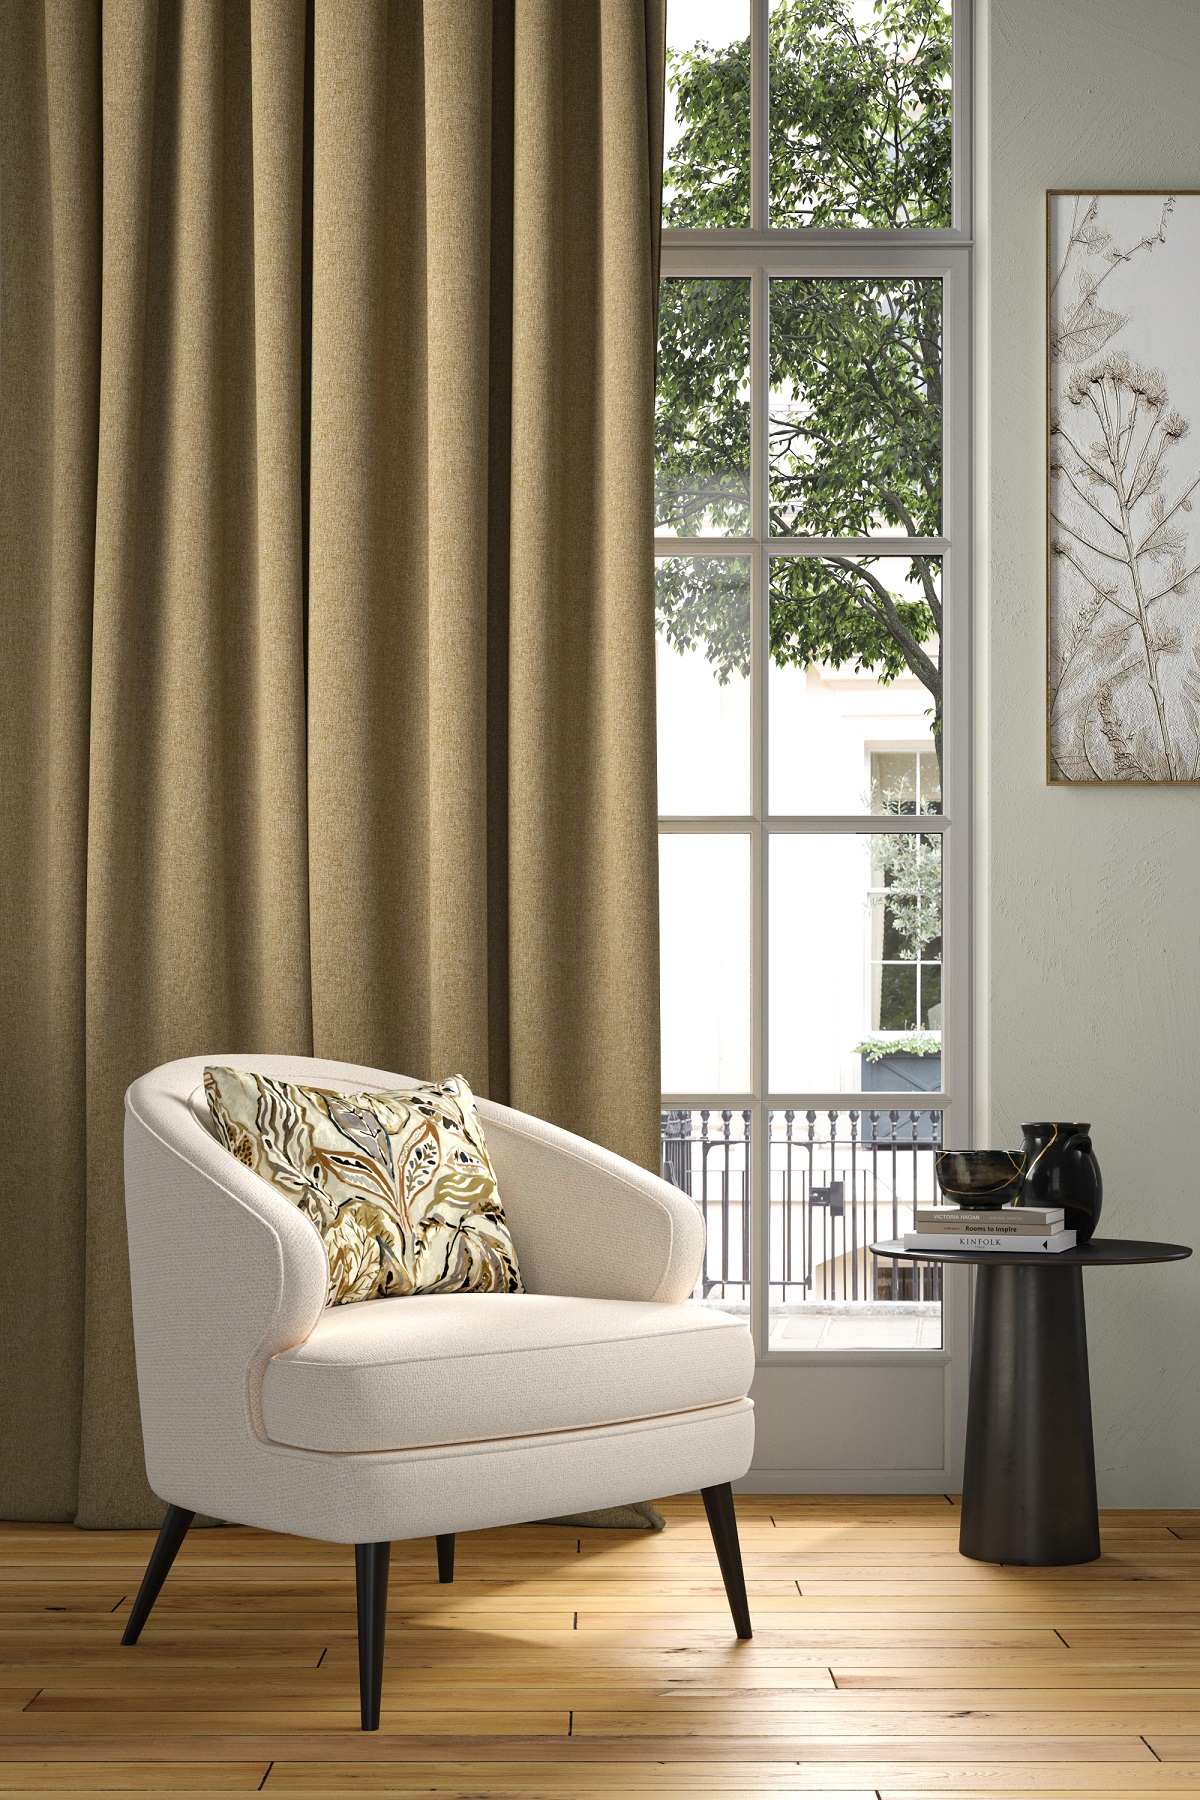 cream tub chair in front of sand coloured full length curtains in blackout fabric